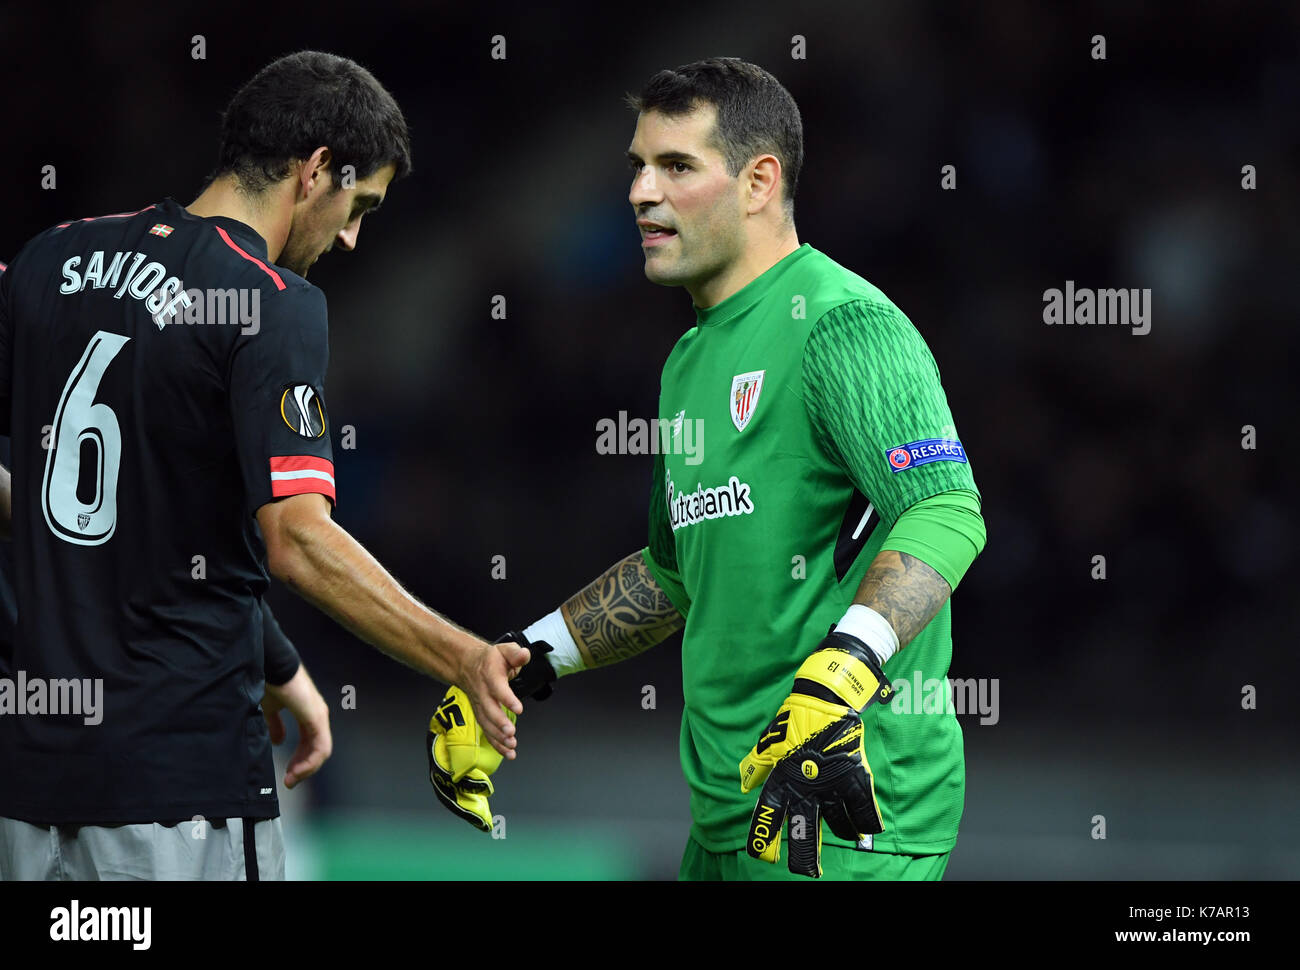 Berlin, Germany. 14th Sep, 2017. Bilbao's Mikel San José Domínguez (L) and goalkeeper Kepa Arrizabalaga Revueltaduring the Europa League soccer match between Hertha BSC and Athletic Bilbao, group phase, group J, 1. match day in the Olympia stadium in Berlin, Germany, 14 September 2017. Photo: Soeren Stache/dpa/Alamy Live News Stock Photo